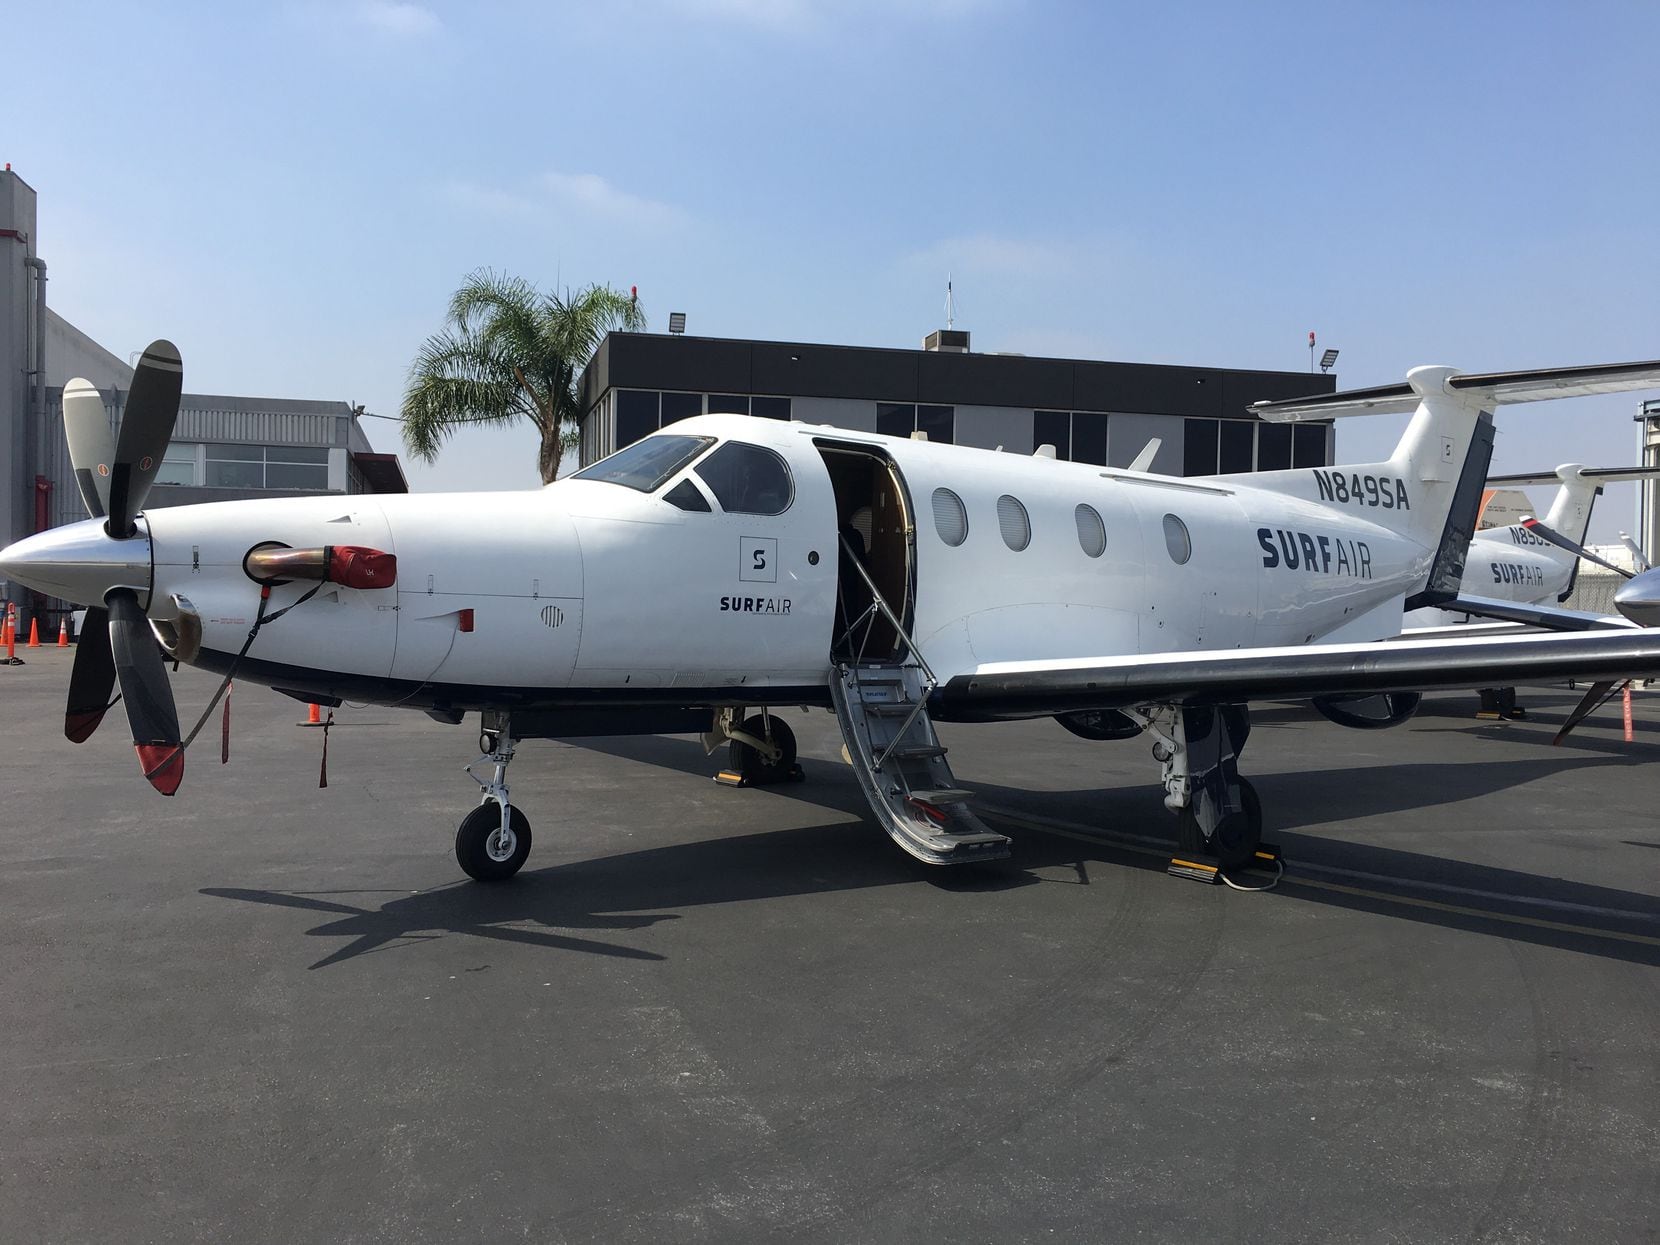 Encompass Aviation operated as Surf Air's exclusive carrier in California for about a year,...